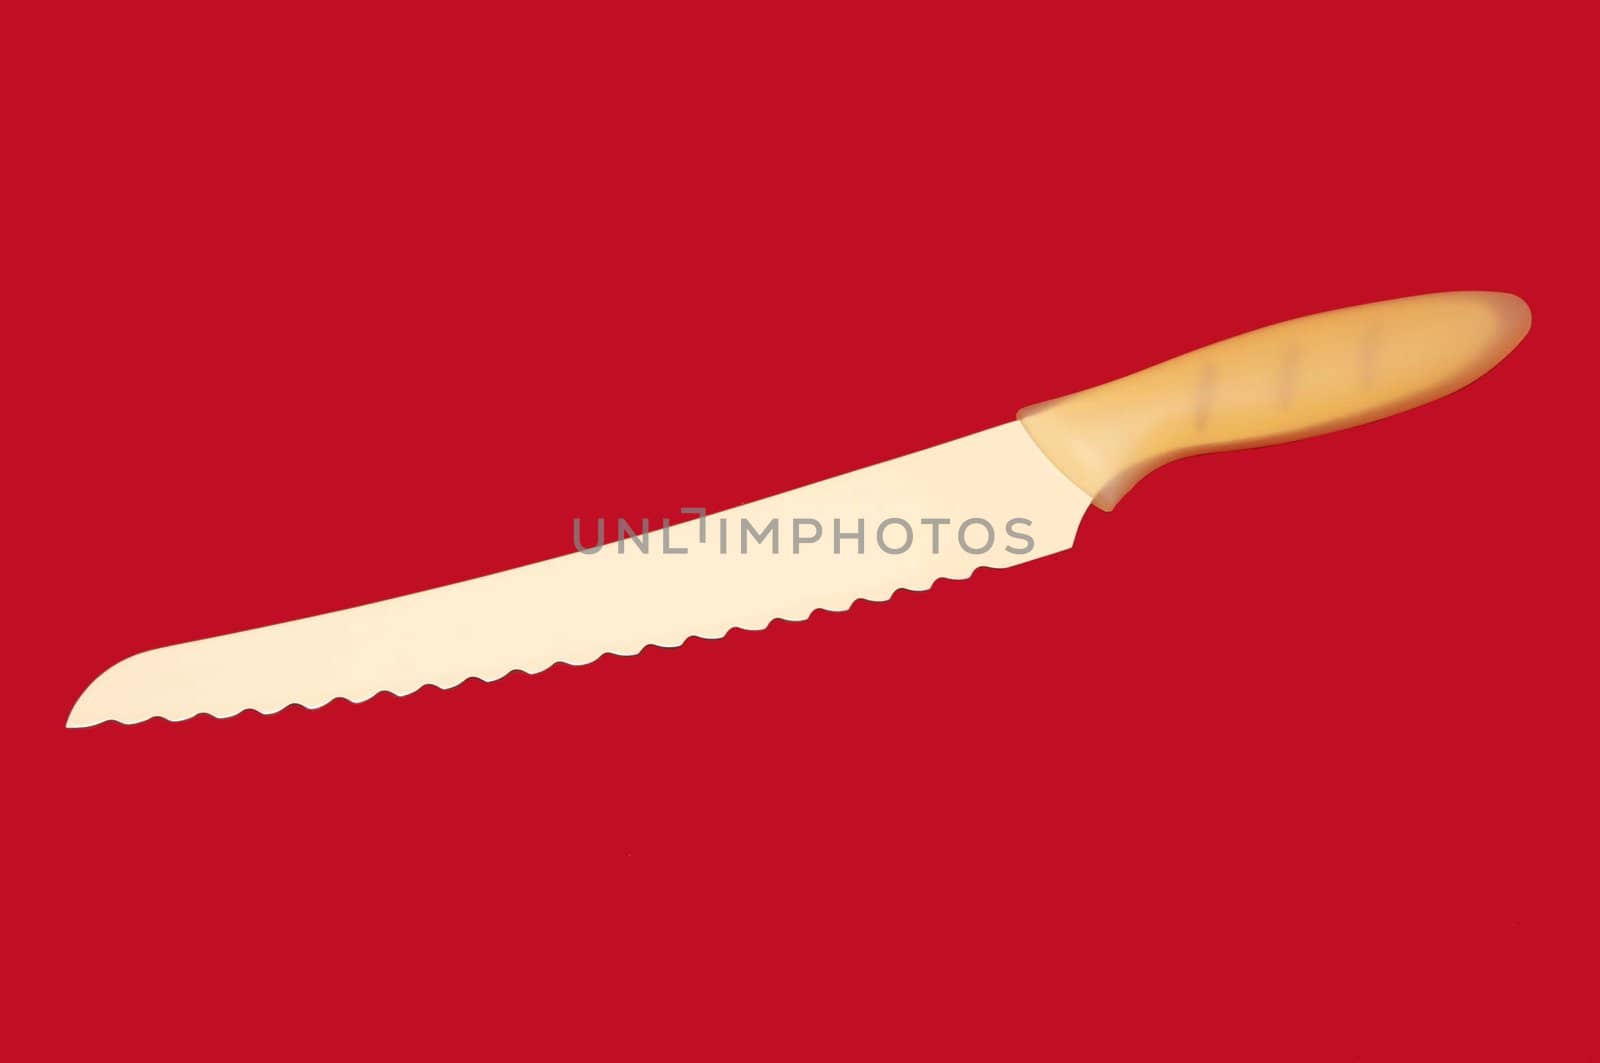 butcher knife with a ceramic coating on a red background